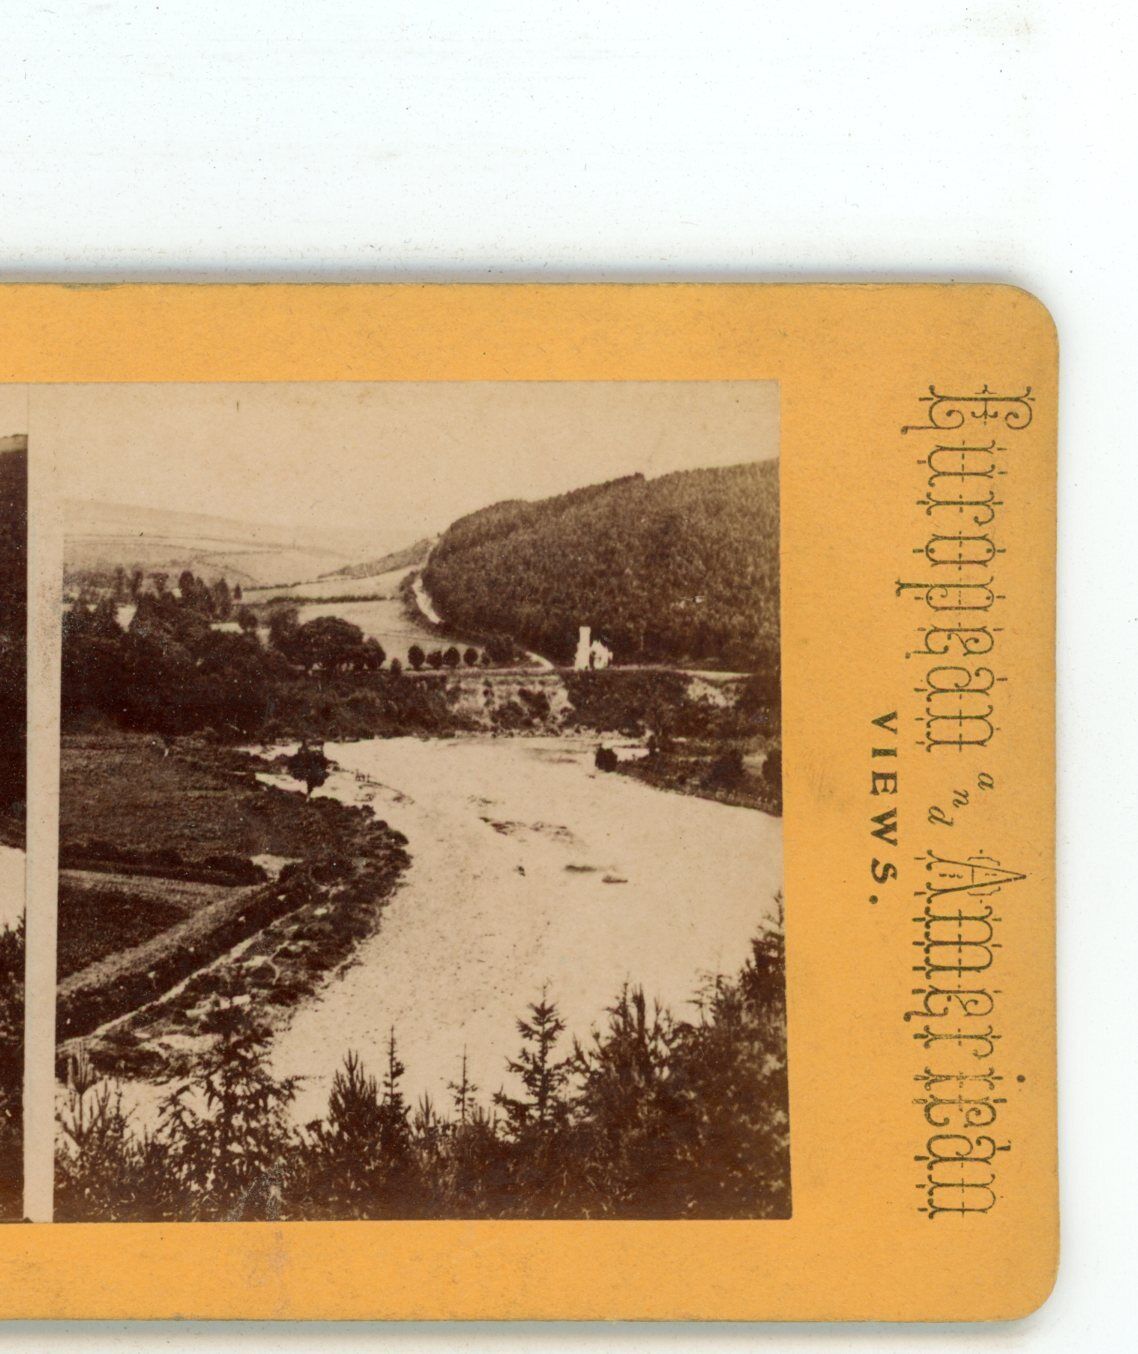 Avoca Dale Co County of Wicklow Ireland Stereoview